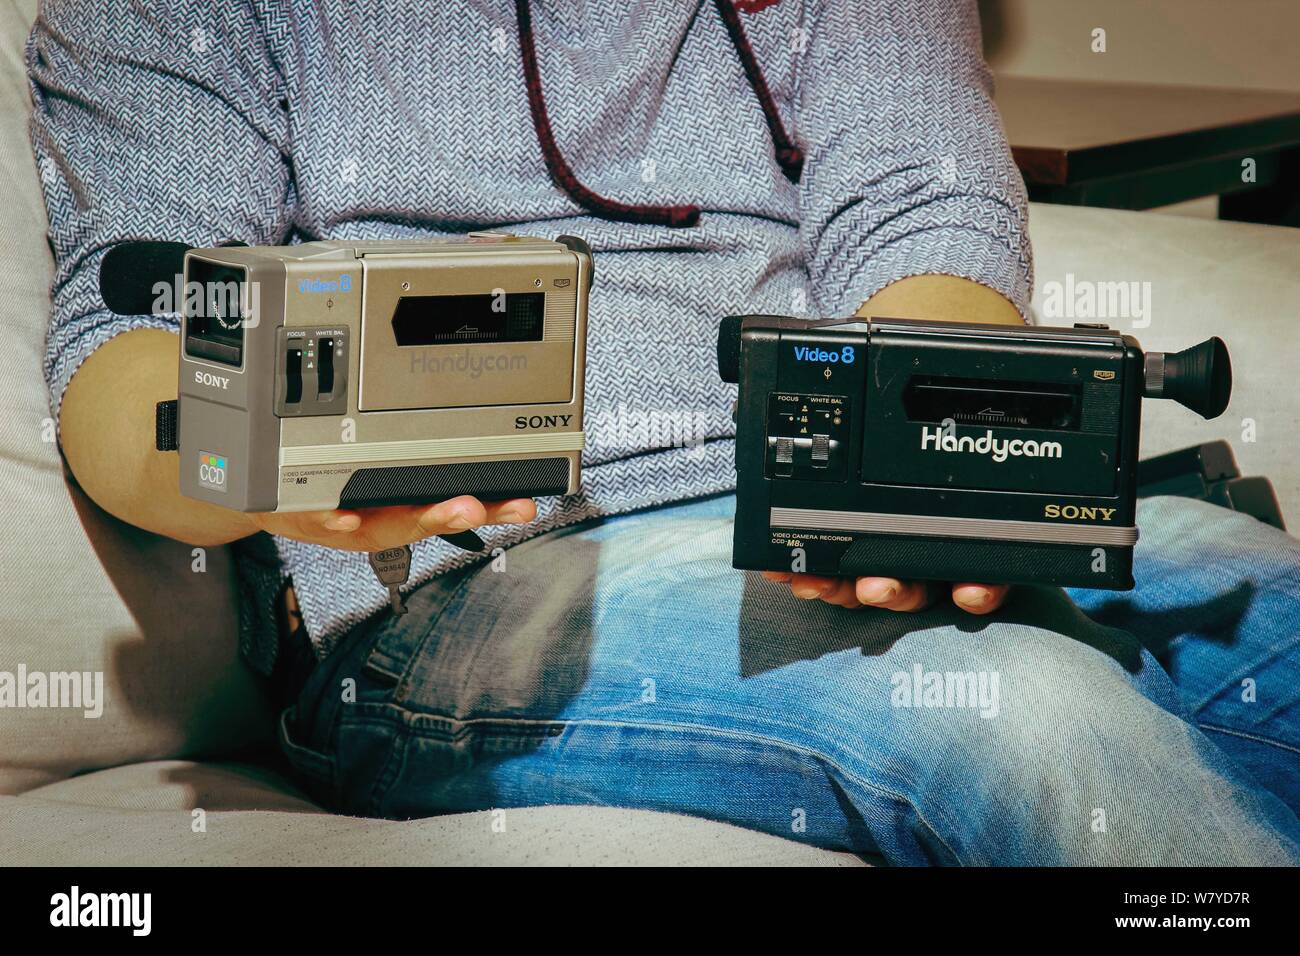 35-year-old Chinese videographer Mr. Gan shows world's first civil portable video camera Sony Handycam CCD-M8 he collected at home in Tianjin, China, Stock Photo